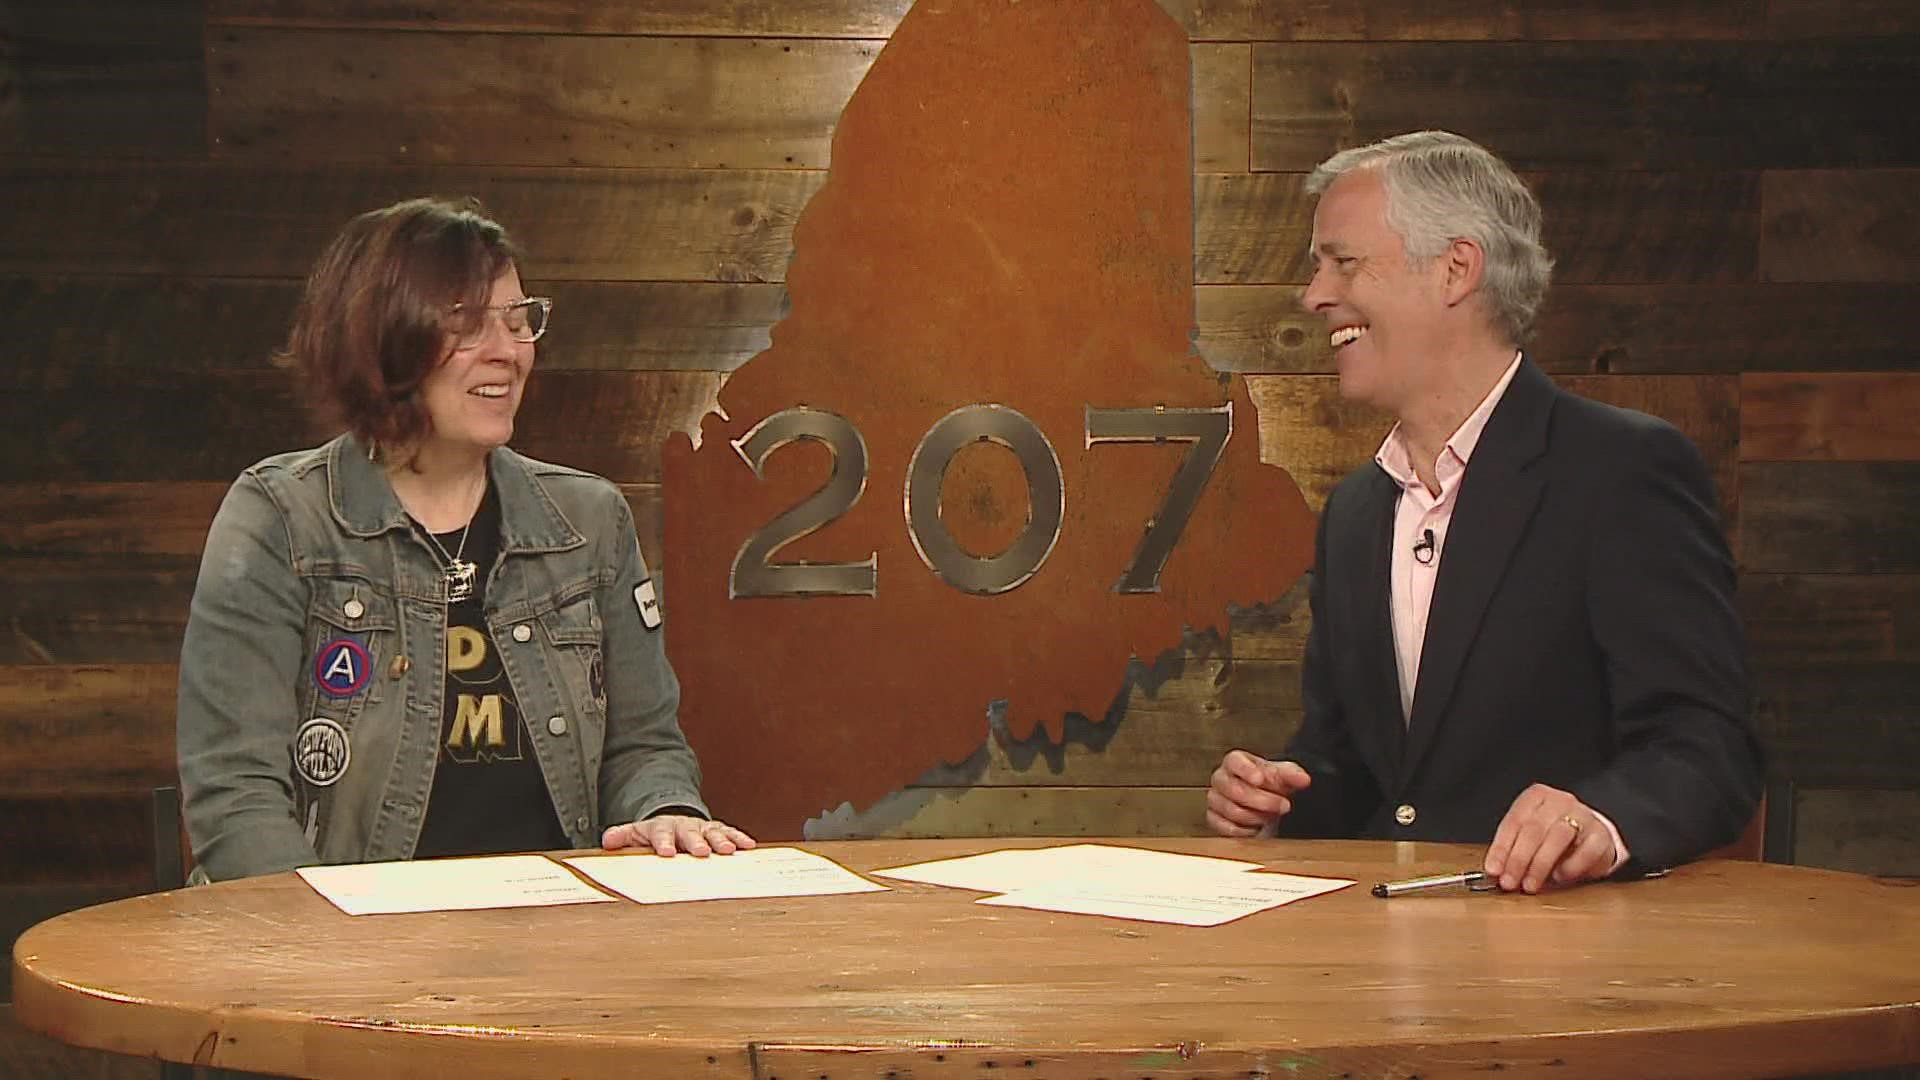 Aimsel Ponti from the Portland Press Herald joins 207 to preview upcoming concerts